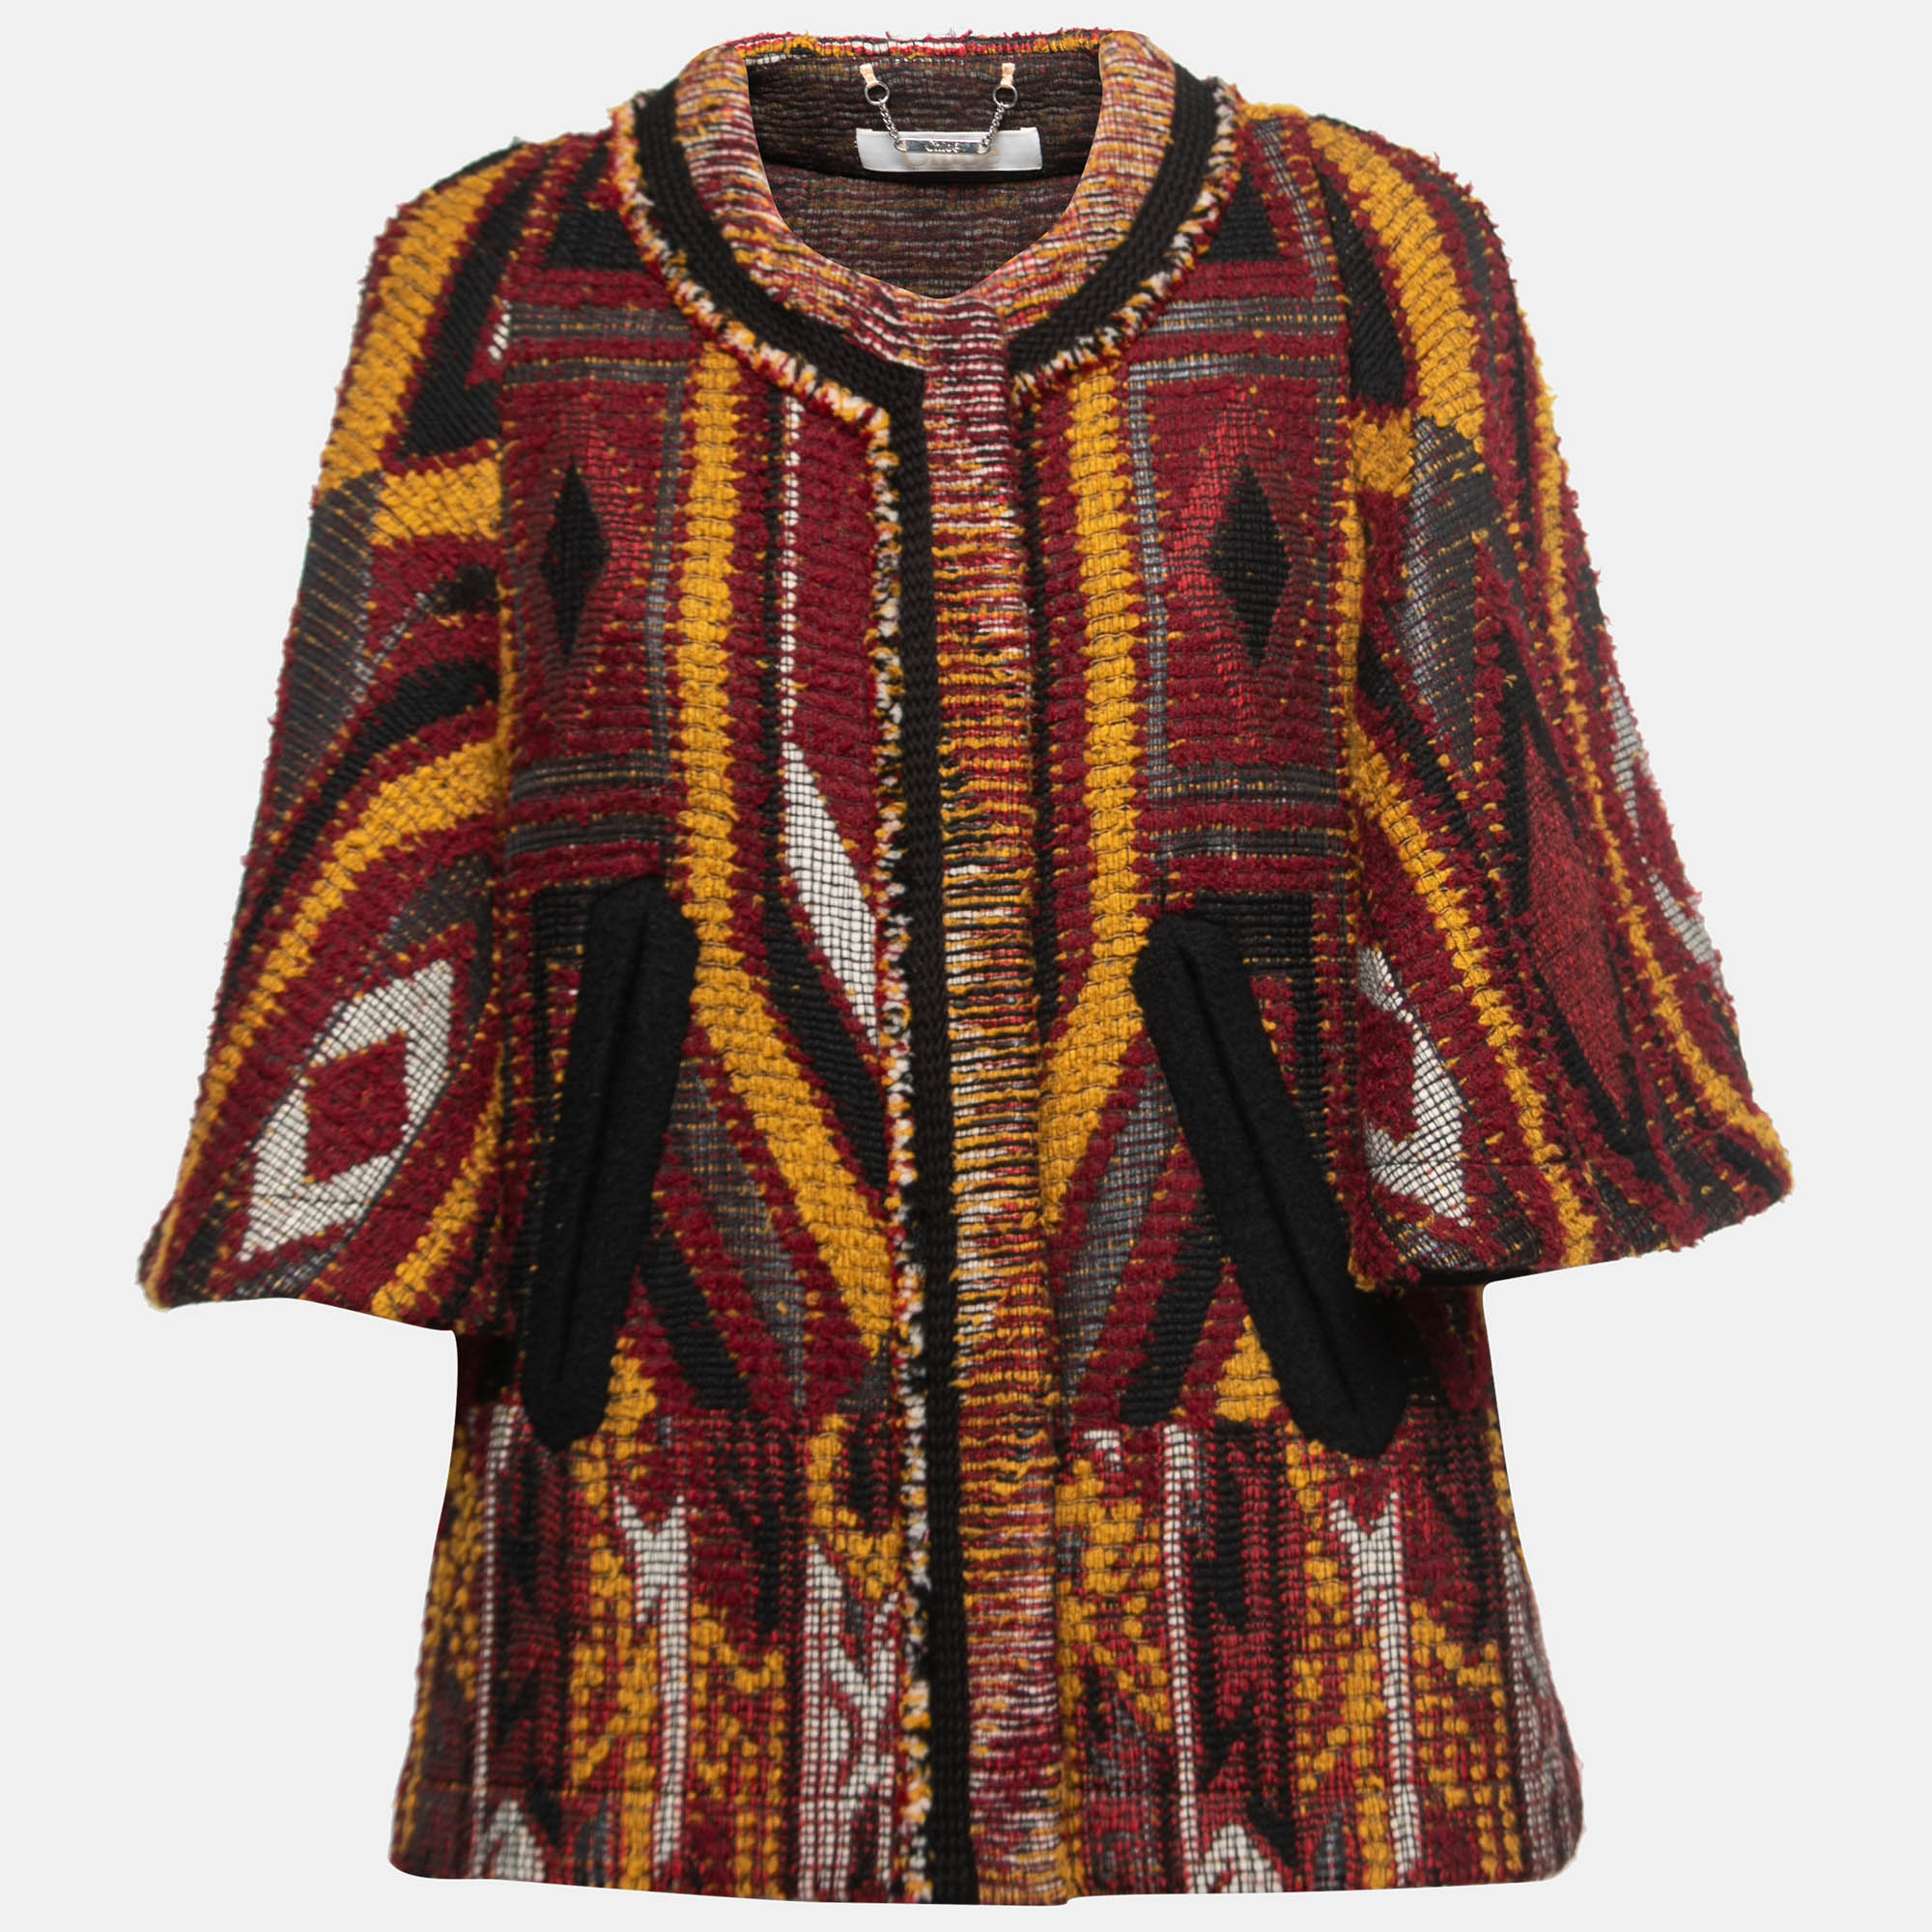 Pre-owned Chloé Multicolor Tribal Patterned Boucle Tweed Cape Coat S